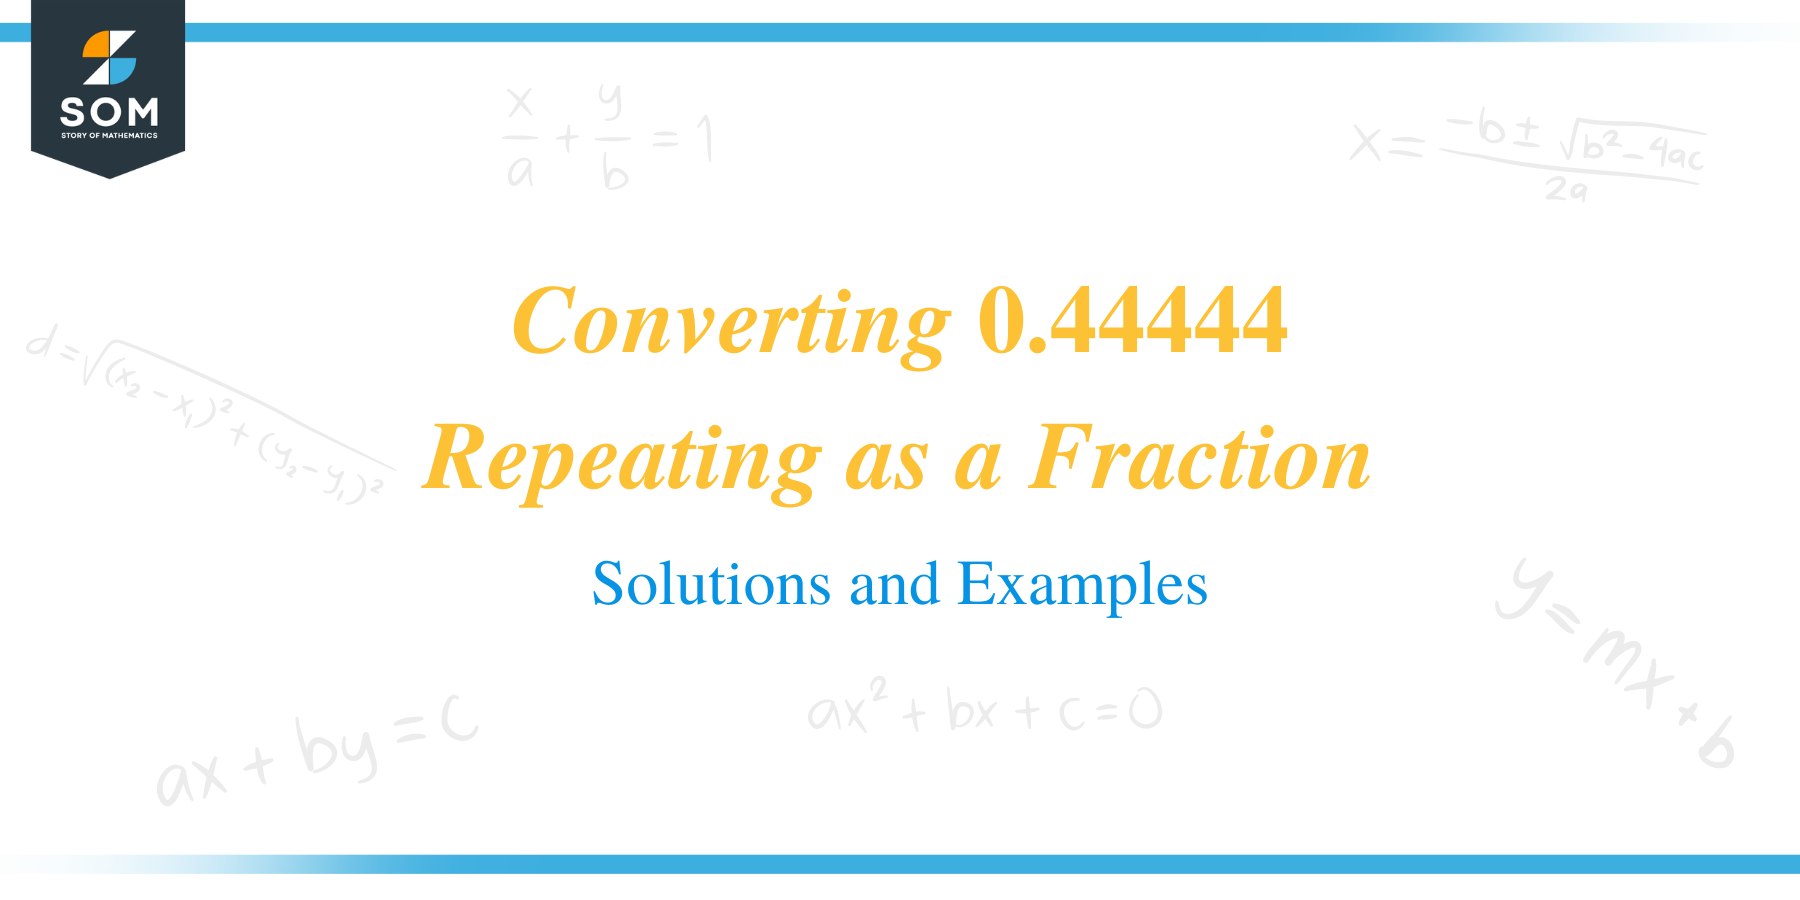 Converting 0.44444 repeating as a fraction title